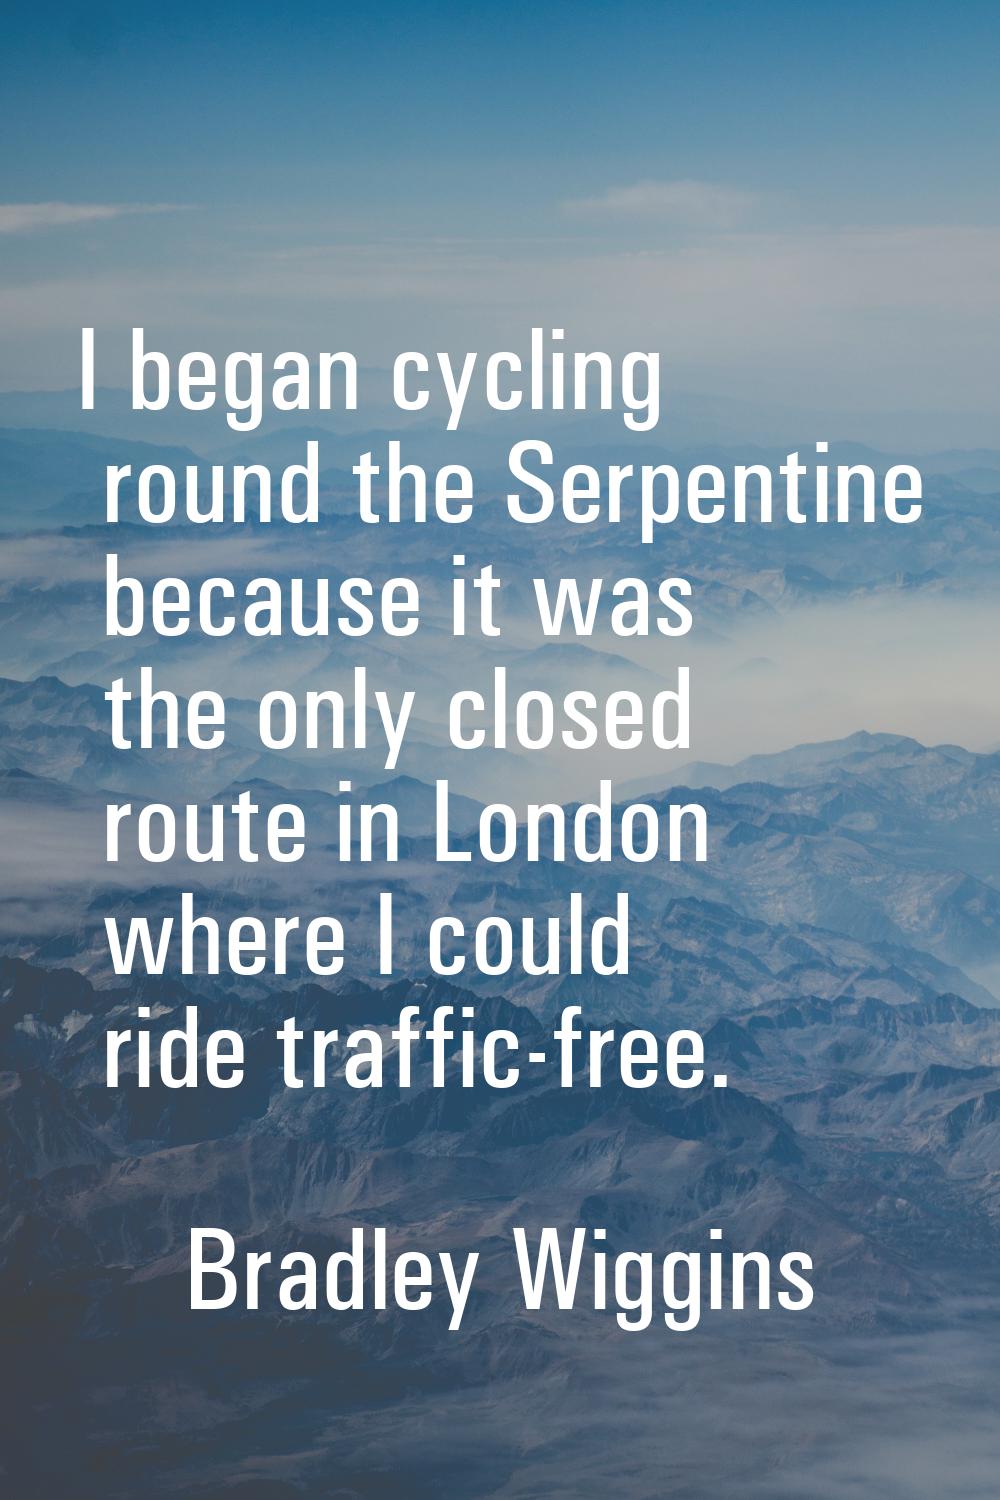 I began cycling round the Serpentine because it was the only closed route in London where I could r